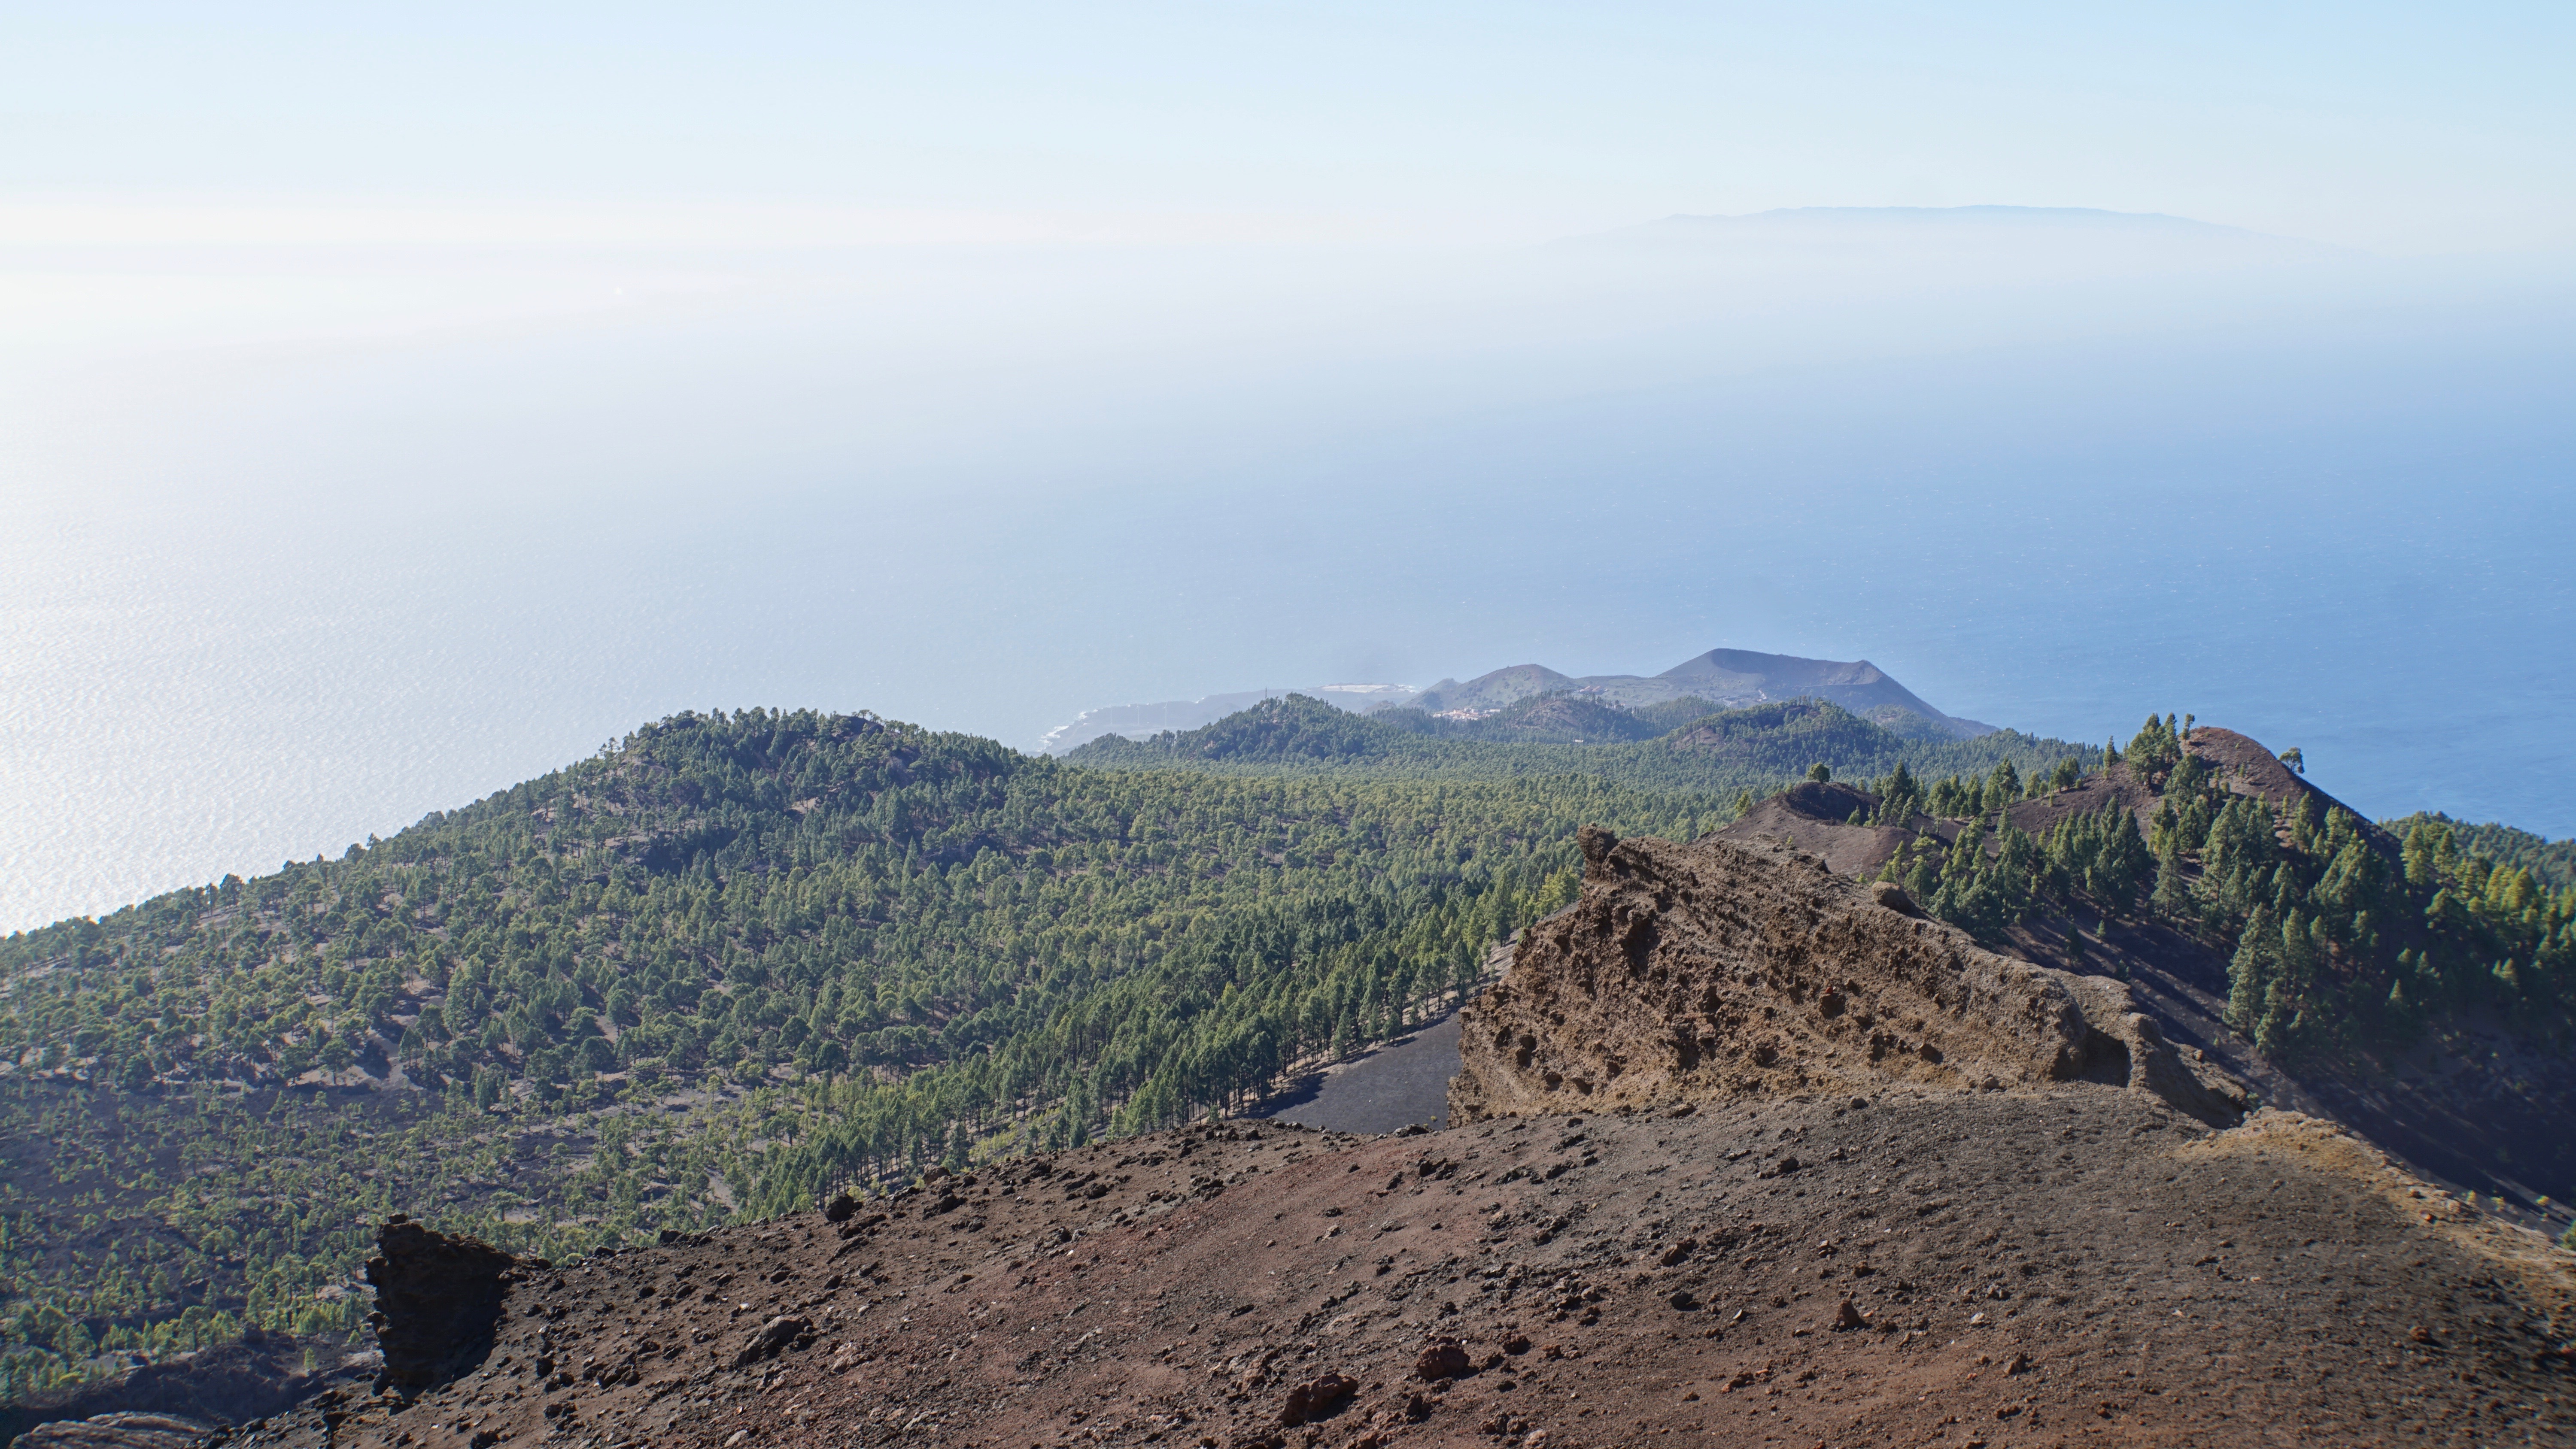 The final part of the GR131 descends to La Palma's south tip